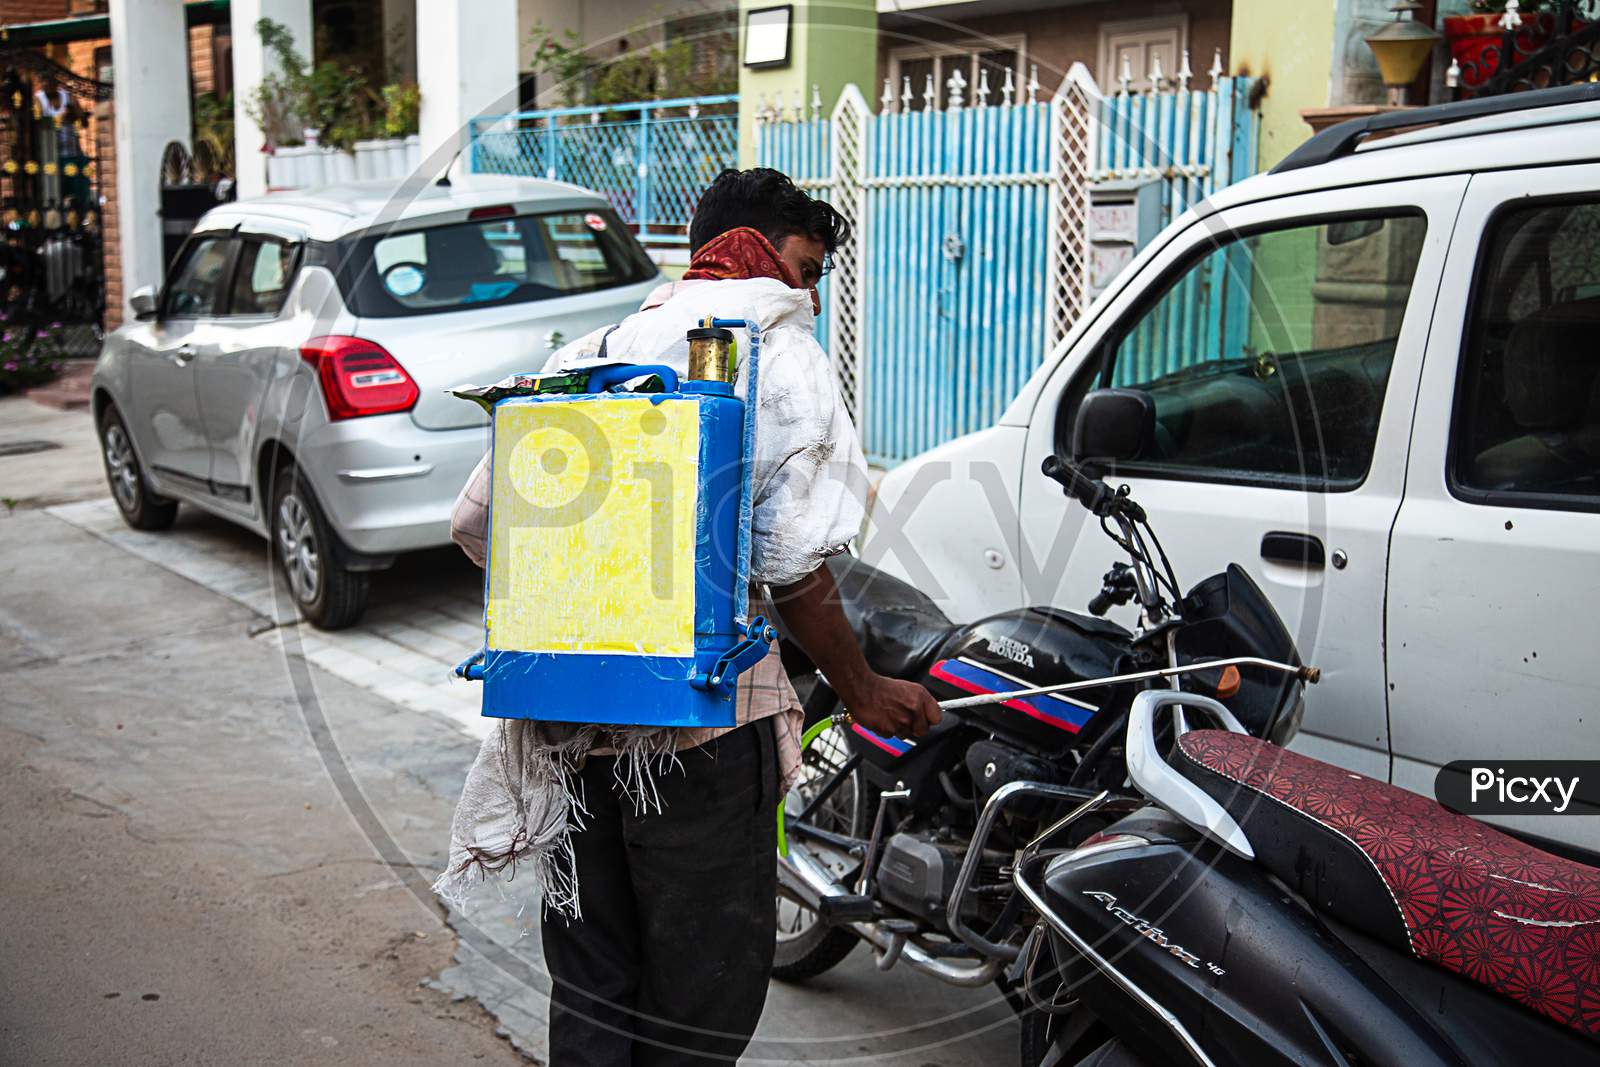 Jodhpur, Rajashtbn, India. 30 March 2020. Coronavirus. Indian Sanitation Worker Wearing Mask Spraying And Cleaning The Streets With Alcohol Based Solution To Disinfect Public Areas And Roads.